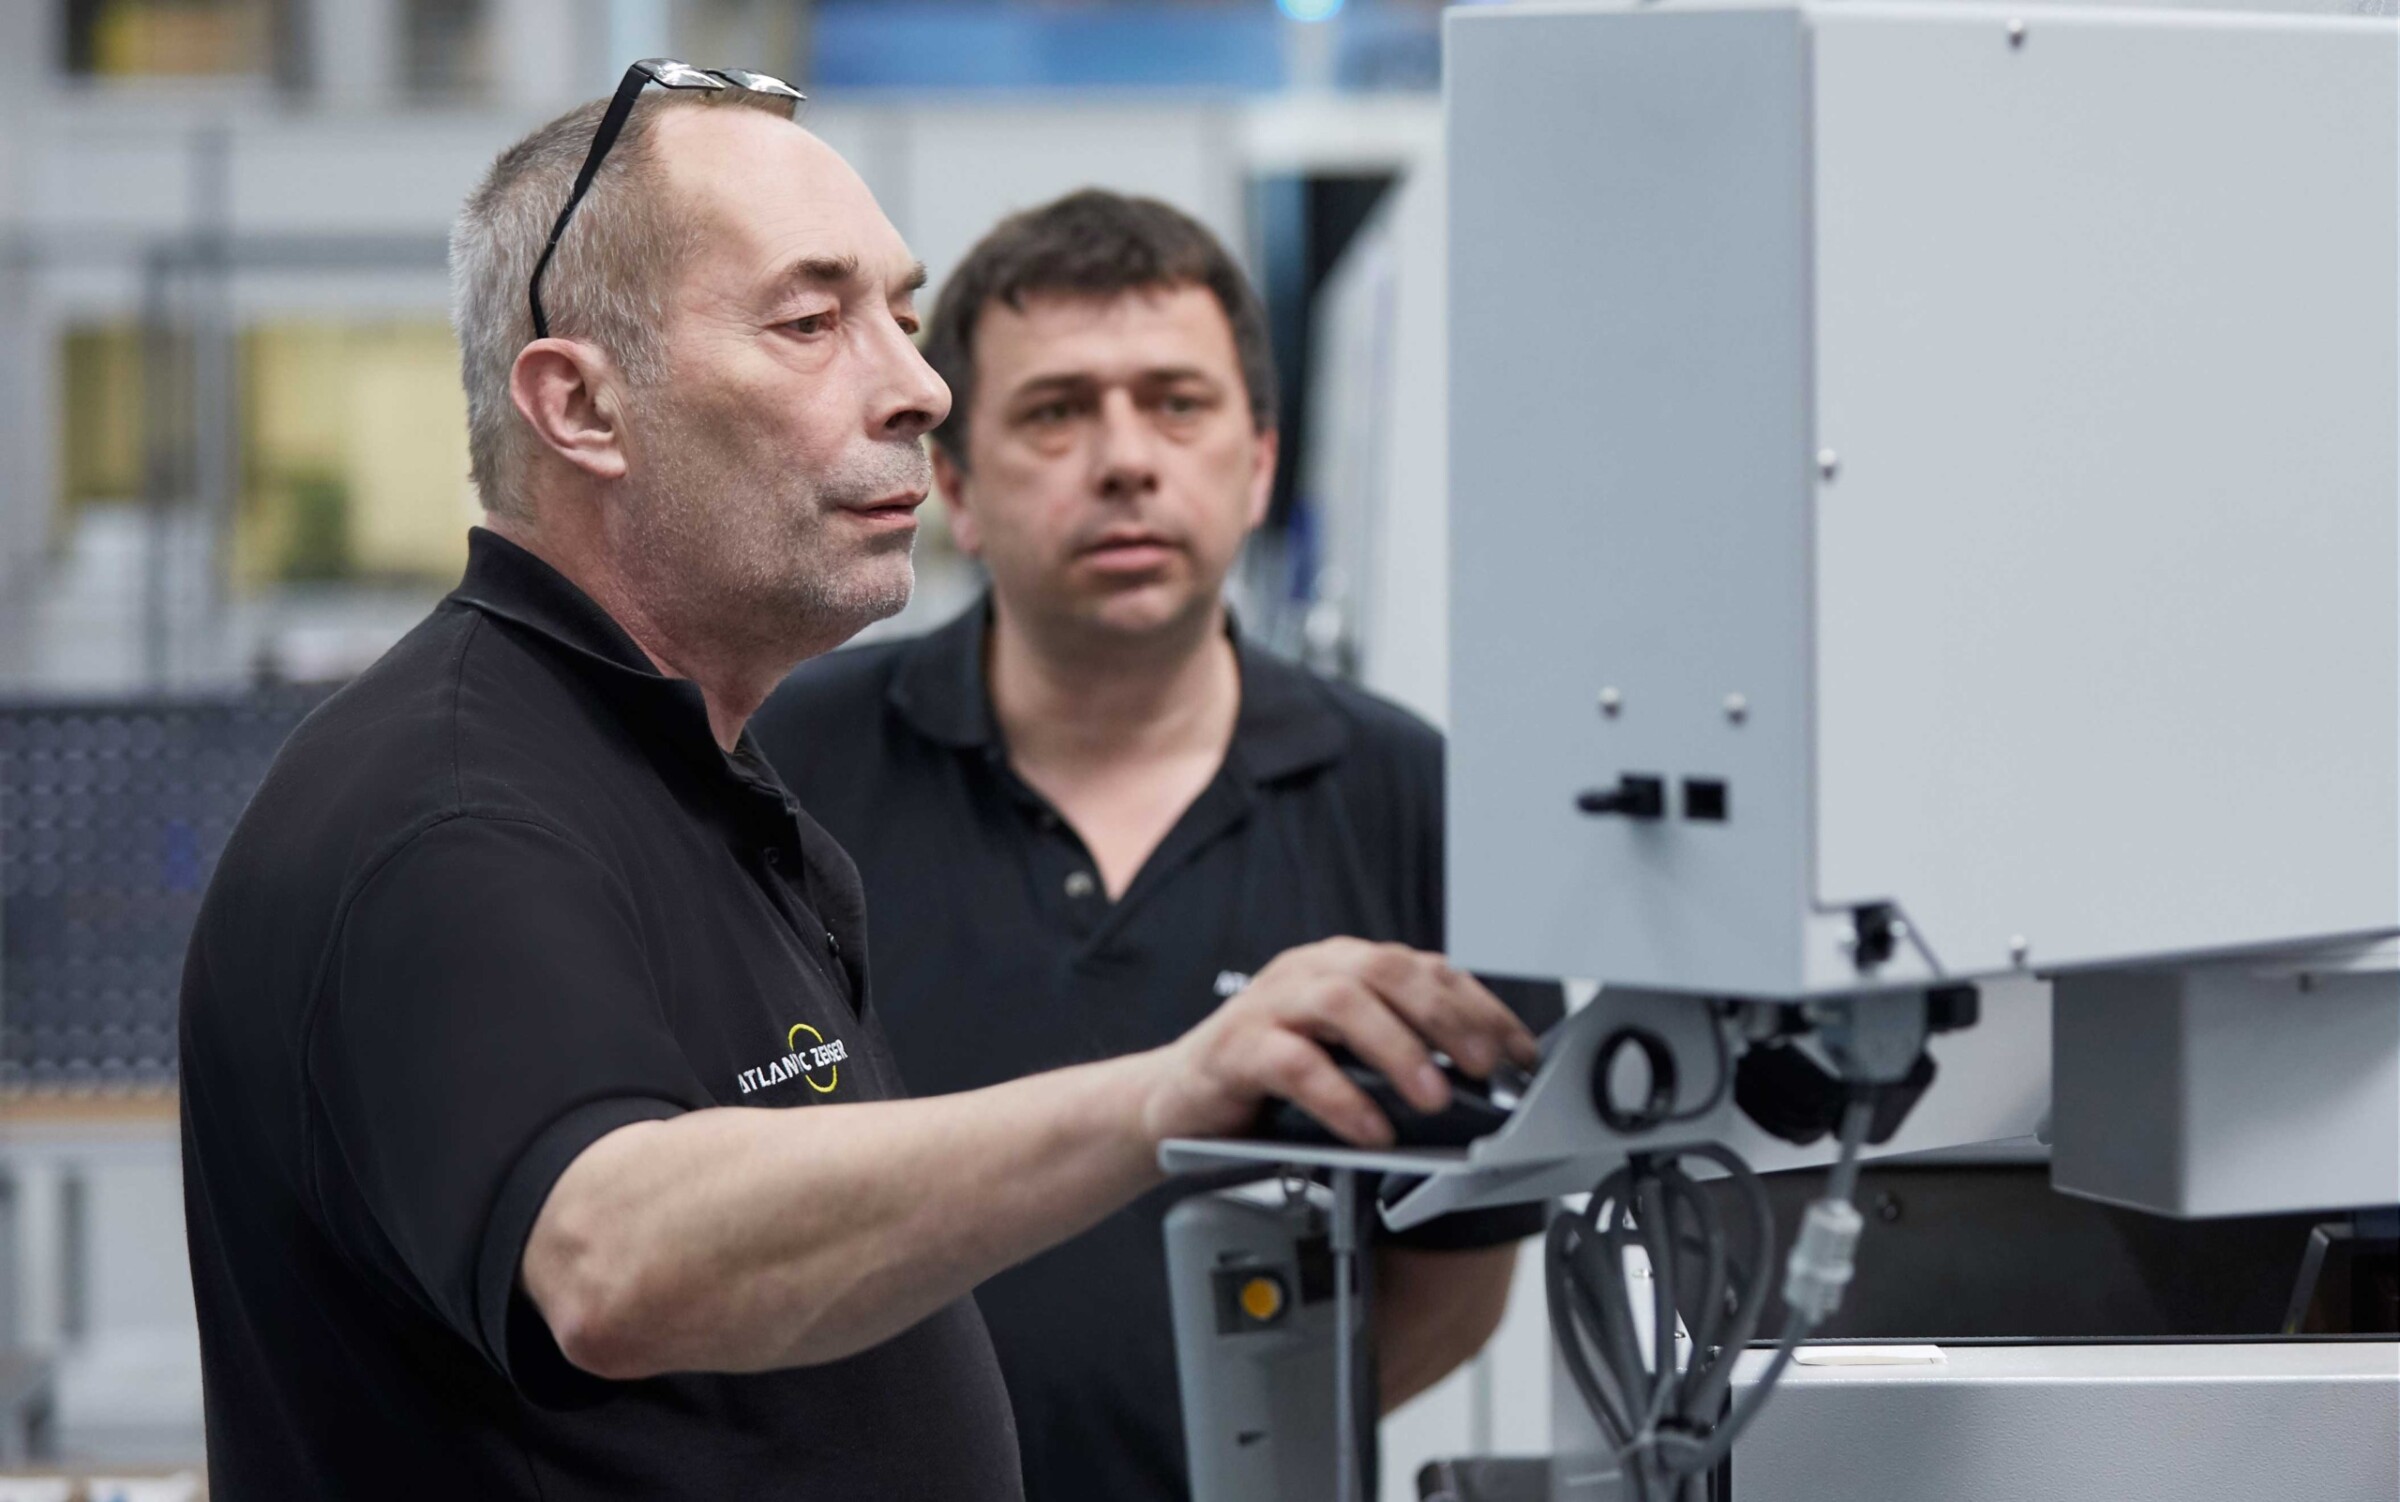 Impressed by the machine’s simple operation and programming are Kurt Rainer Oehlke and Jürgen ­Königsmann, wire-cutters at Atlantic Zeiser GmbH in Emmingen 